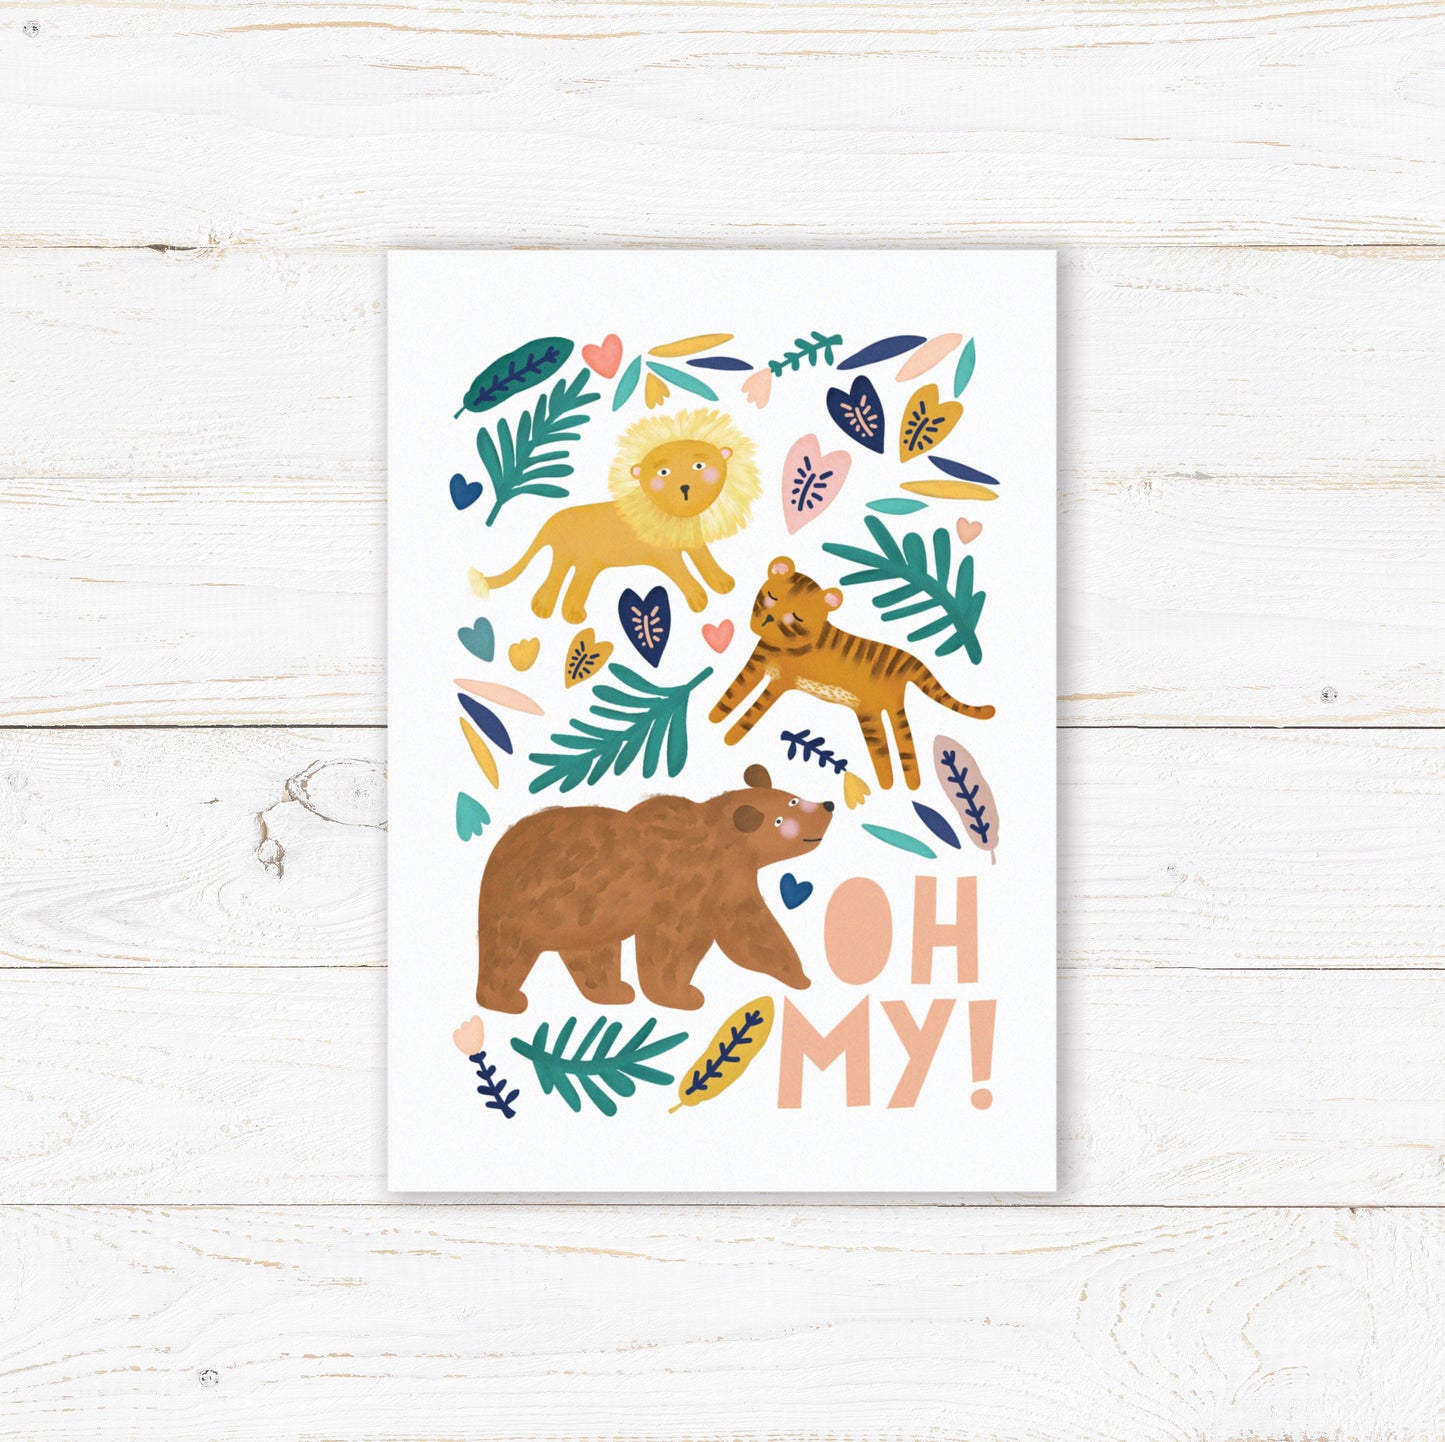 Lions and Tigers and Bears Oh My! Nursery Childs Bedroom Wall Print. New Baby Gift. Christening Gift. Child's Birthday Present.